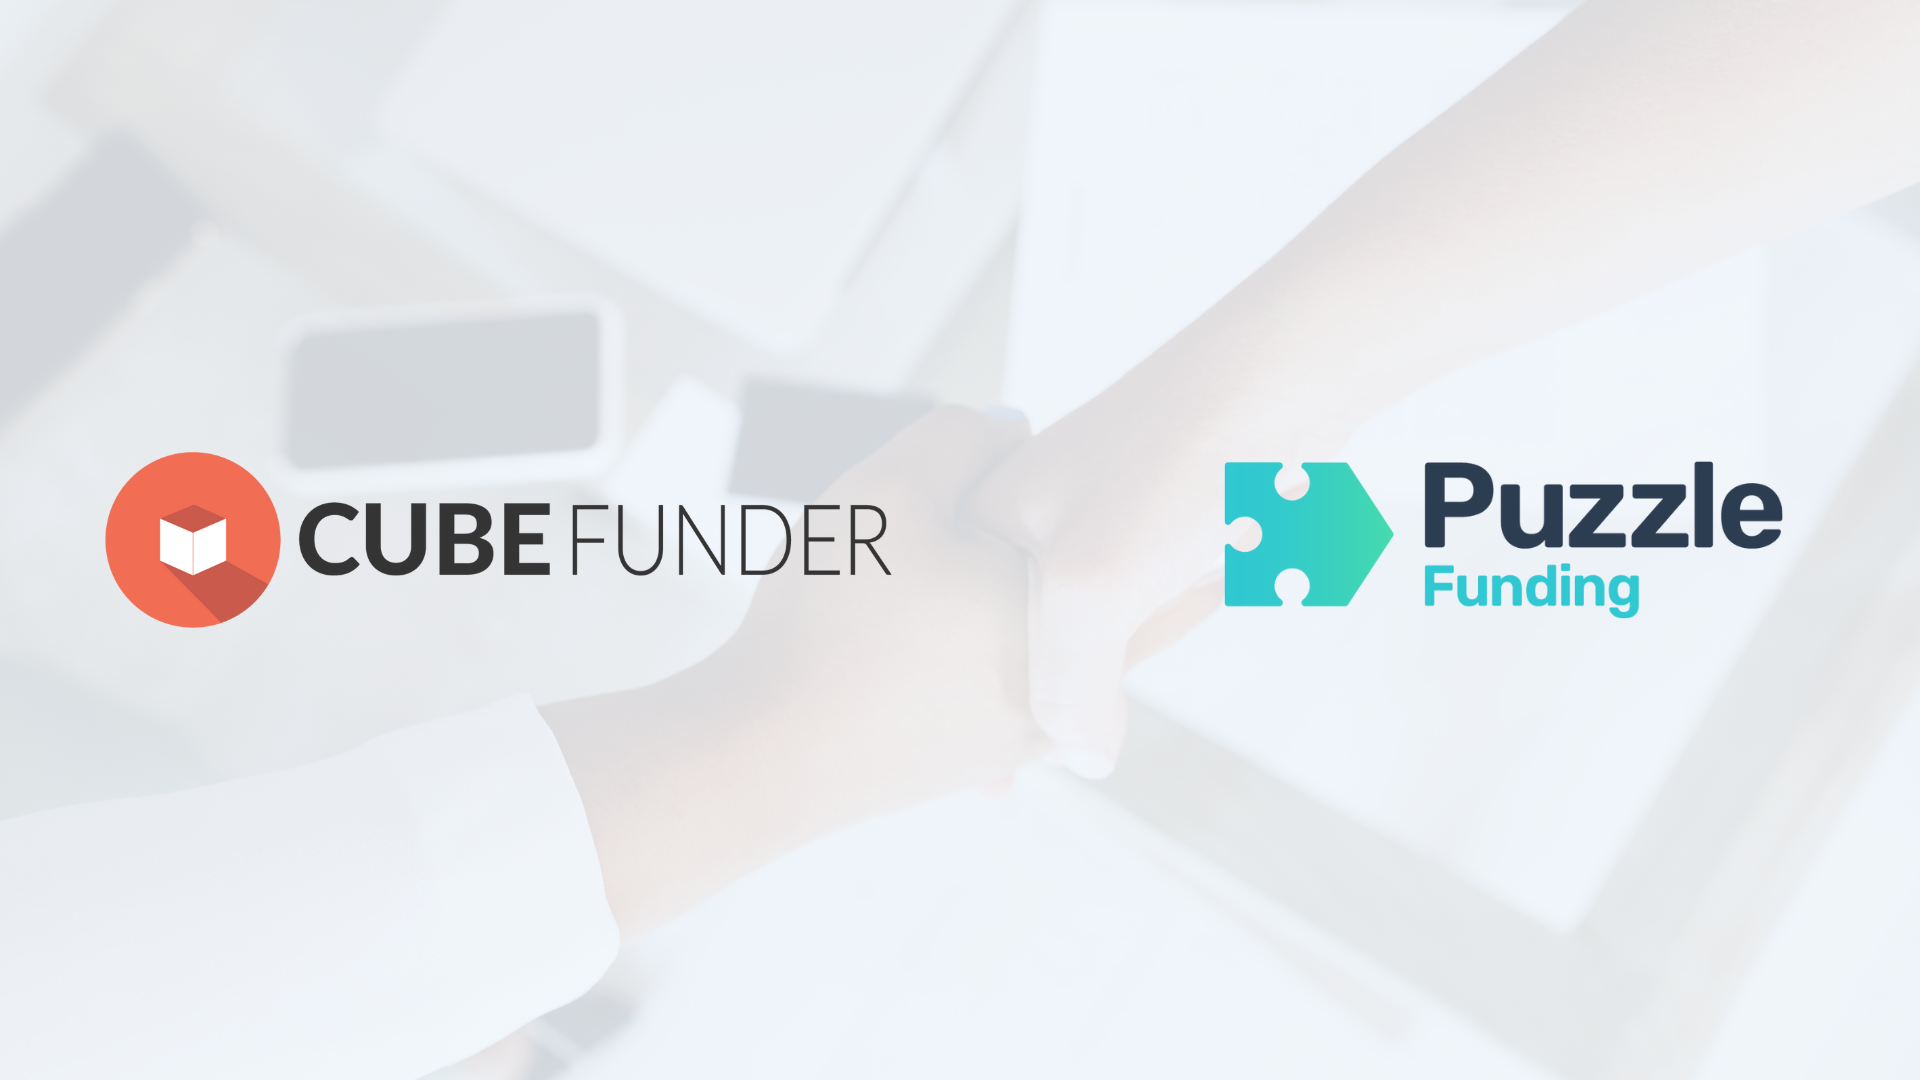 Cubefunder and Puzzle Funding form a strategic partnership